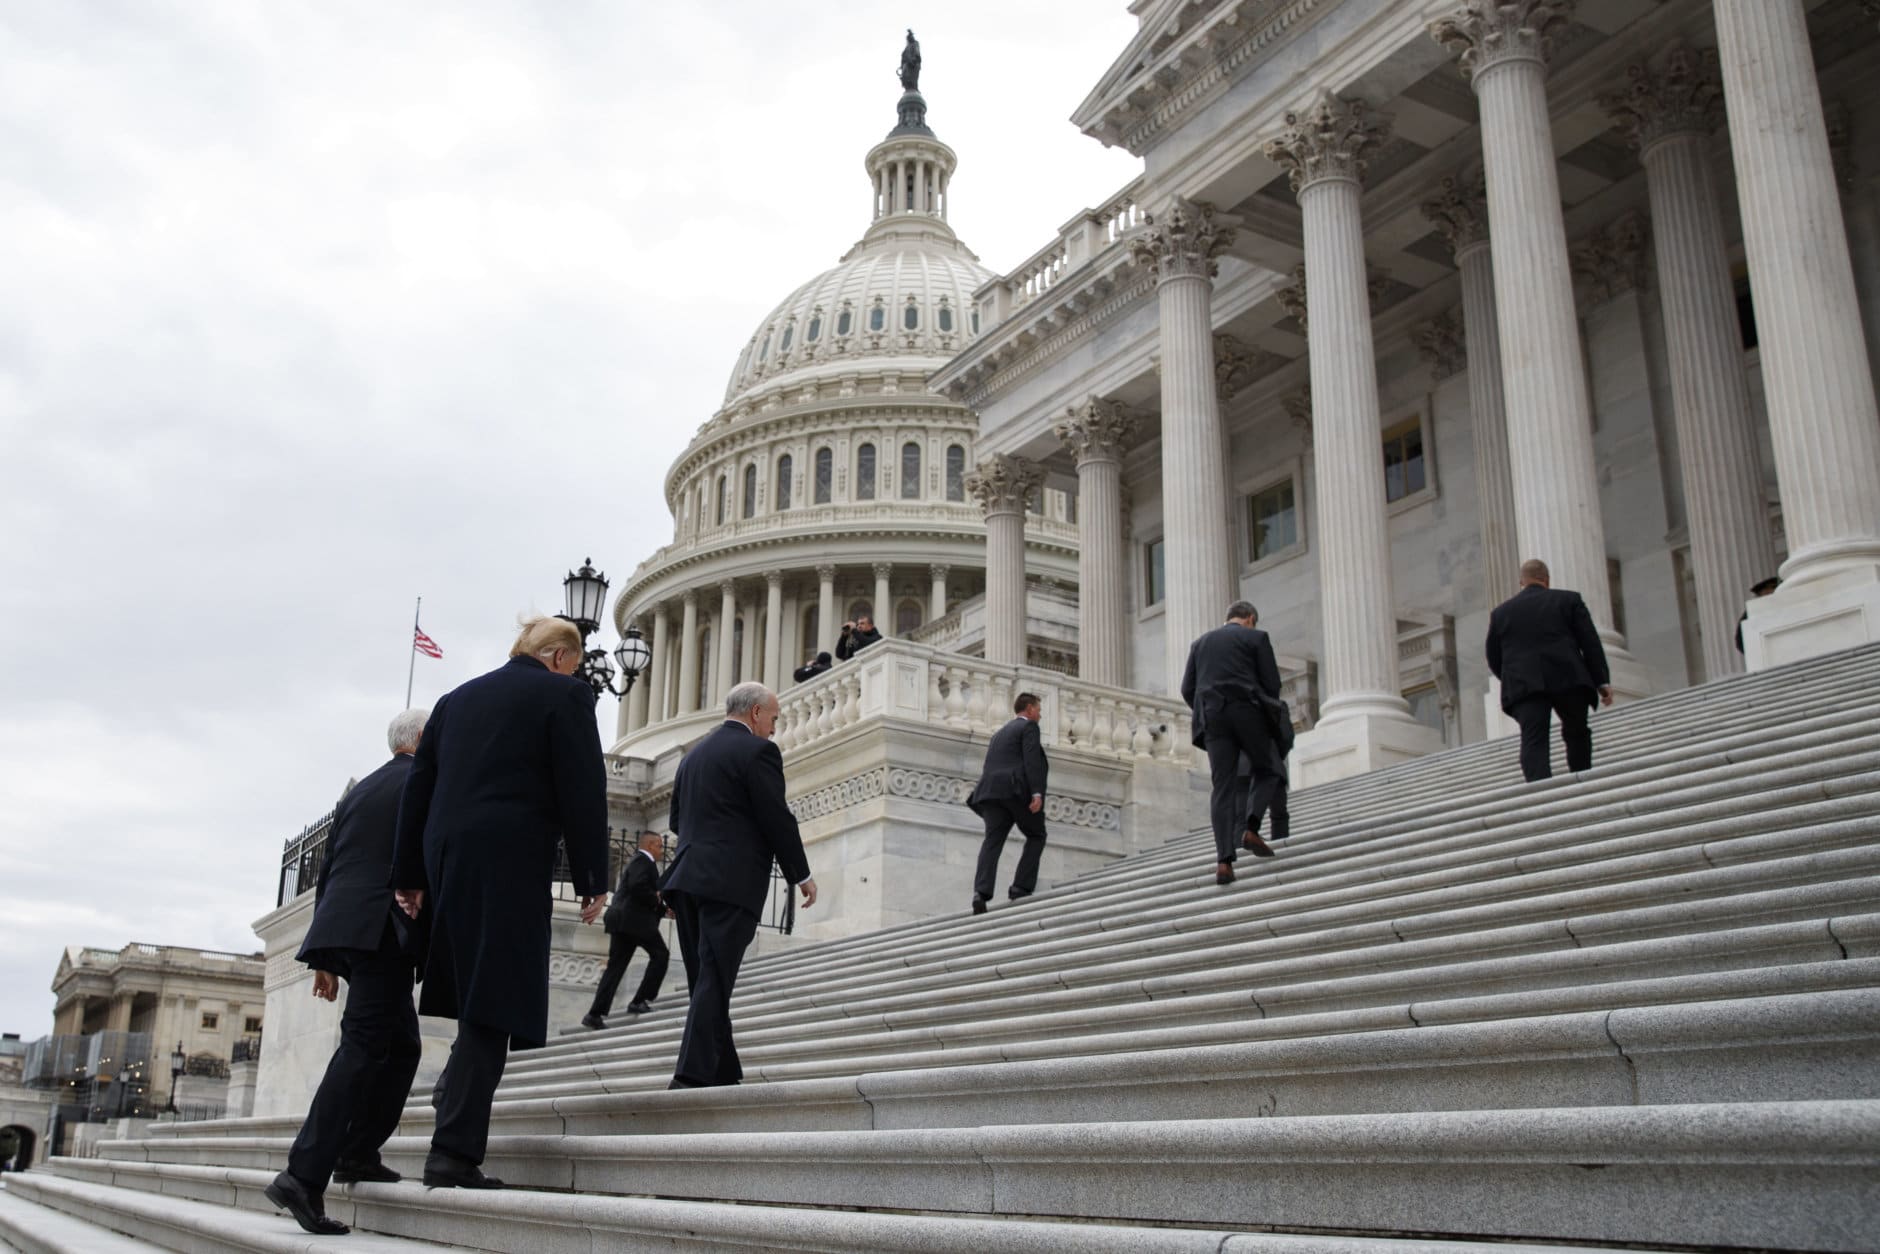 President Donald Trump and Vice President Mike Pence walk up the stairs as they arrive at the U.S. Capitol for a Senate Republican policy lunch, Wednesday, Jan. 9, 2019, in Washington. (AP Photo/ Evan Vucci)